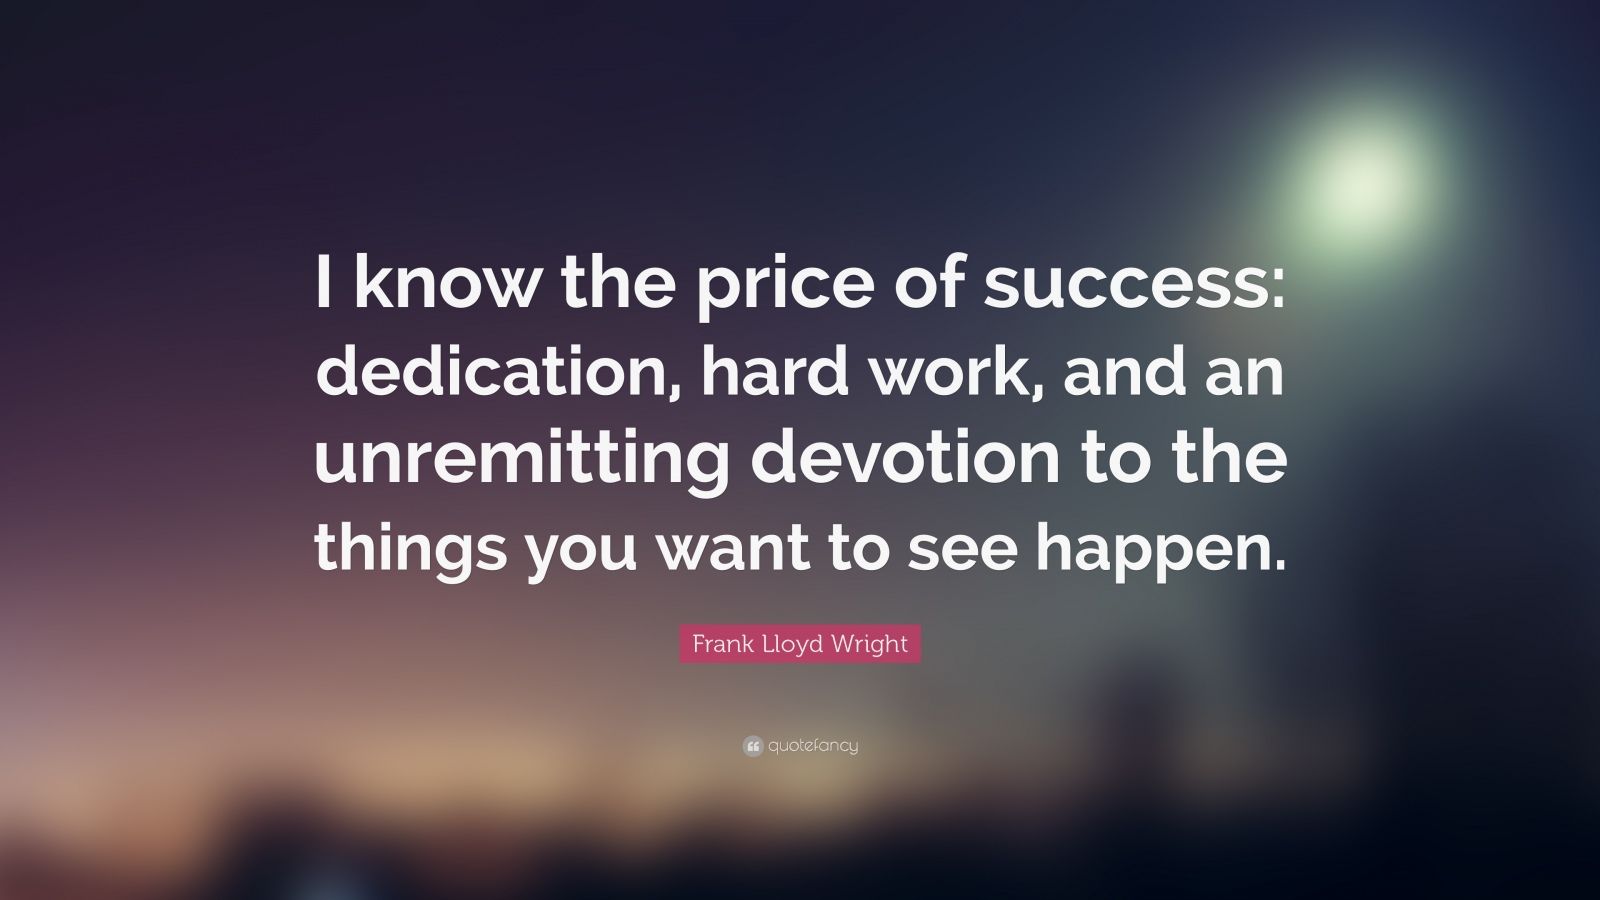 Frank Lloyd Wright Quote “I know the price of success